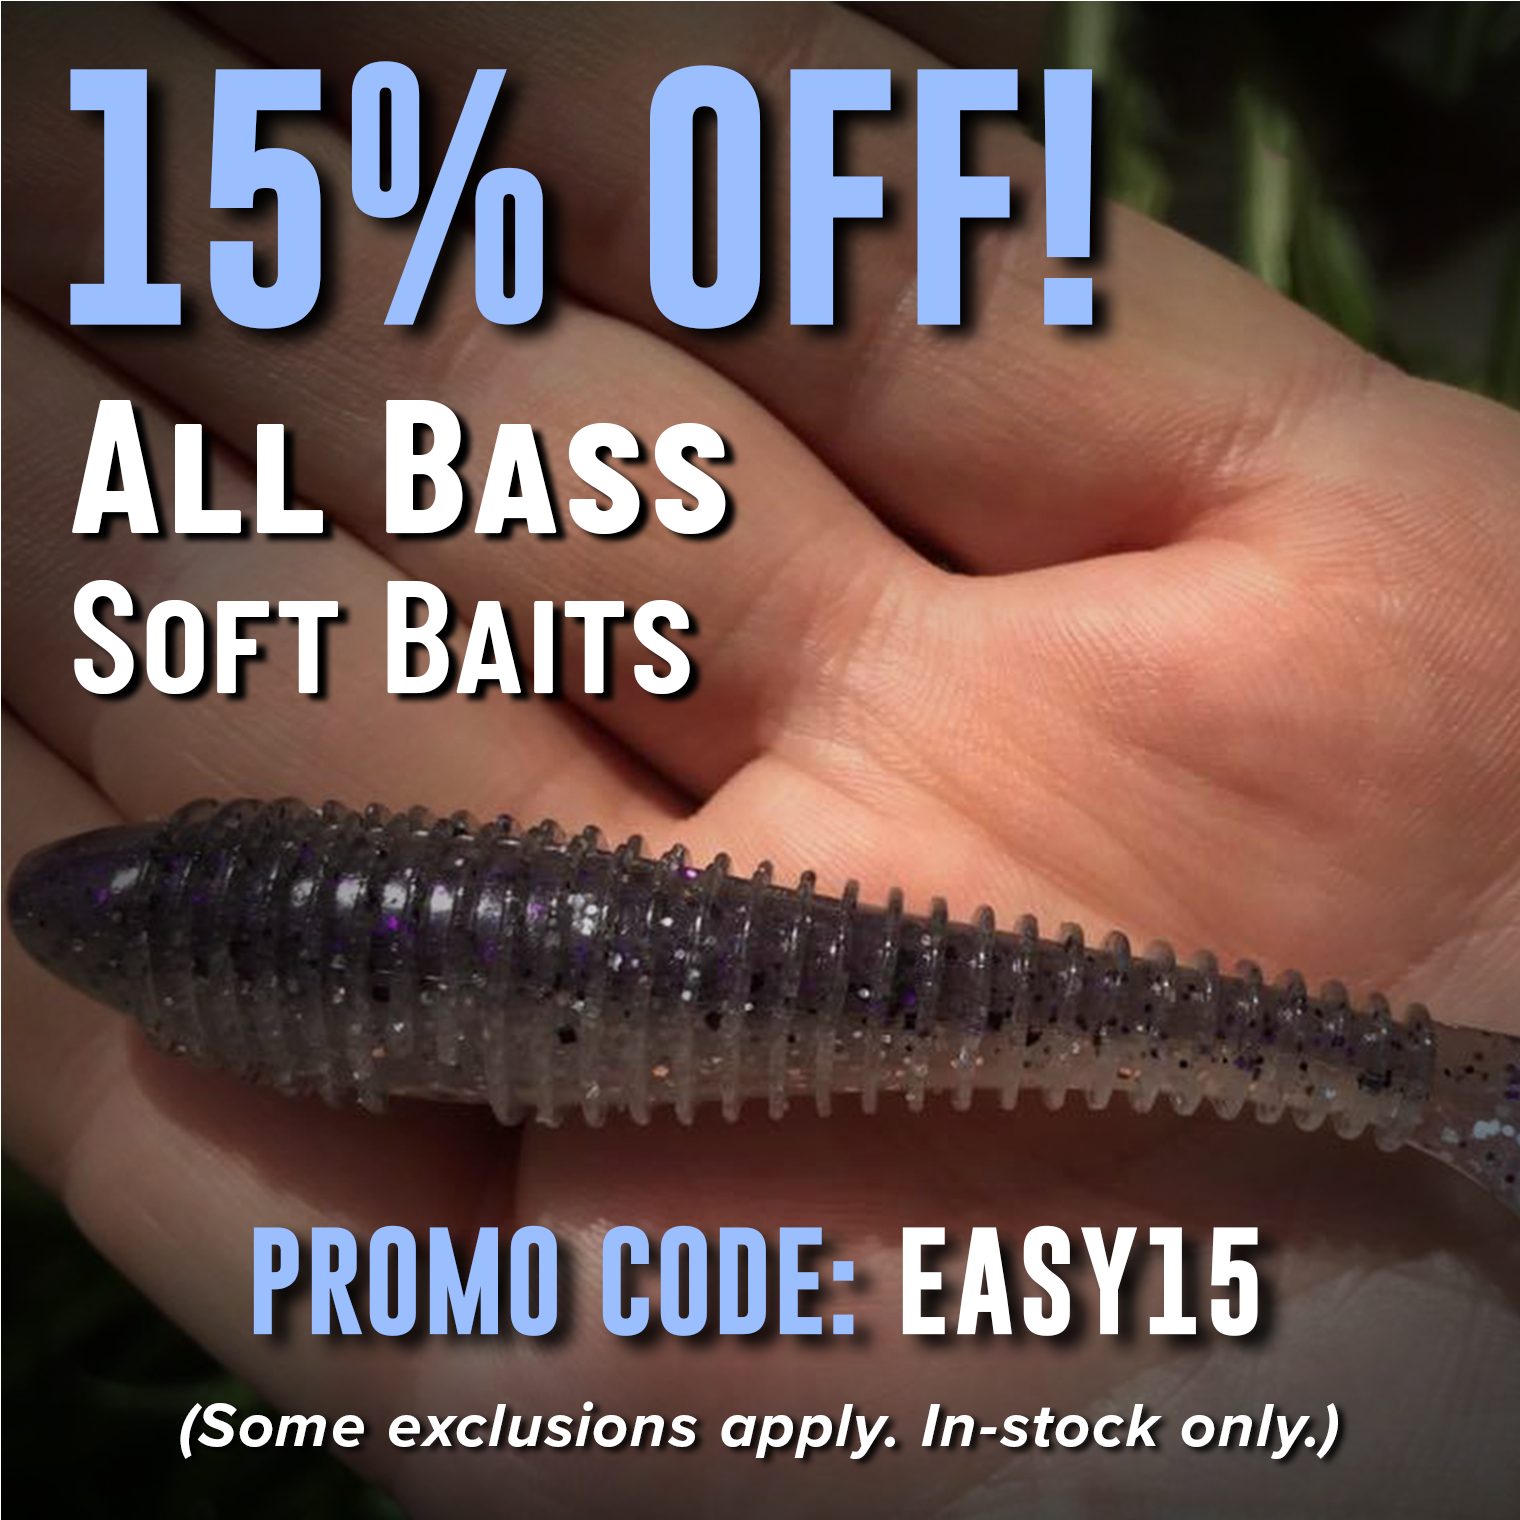 15% Off! All Bass Soft Baits Promo Code: EASY15